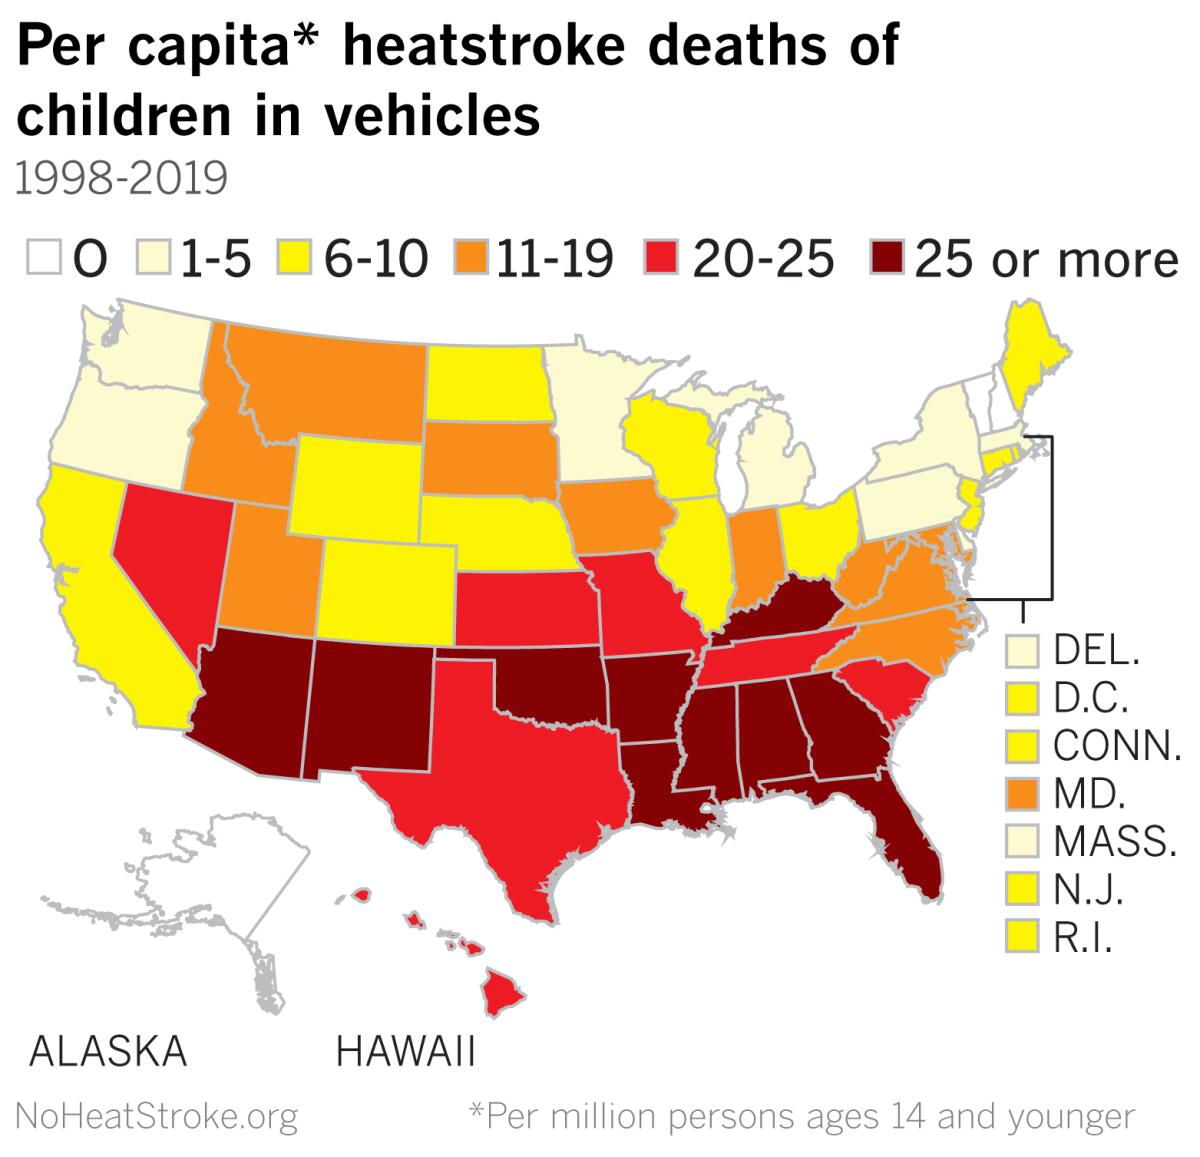 Heatstroke deaths can occur in cooler, northern states.